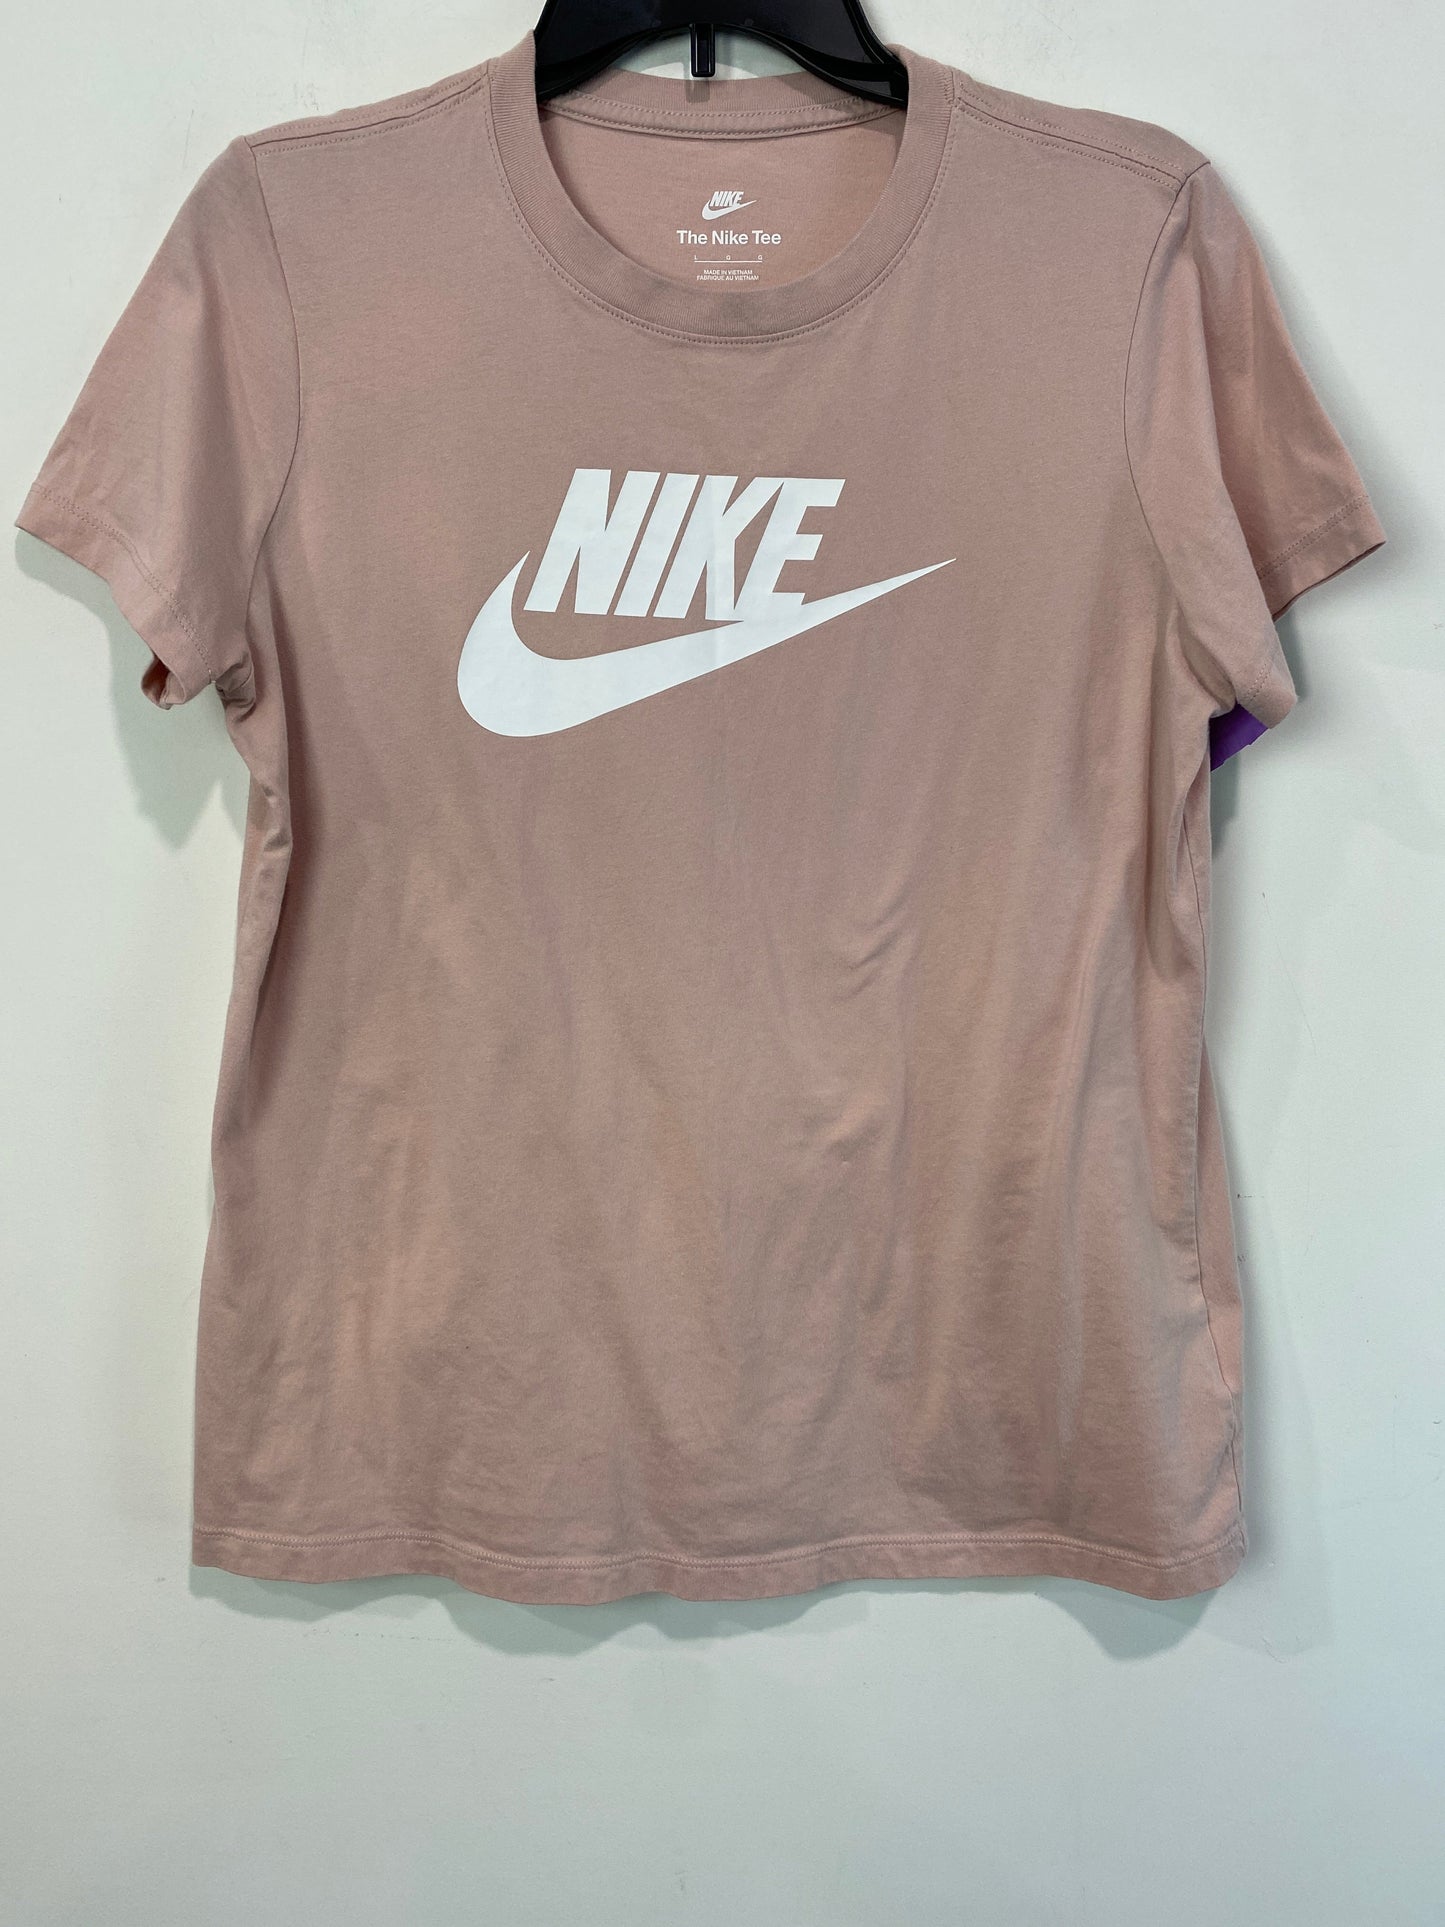 Pink Athletic Top Short Sleeve Nike, Size L